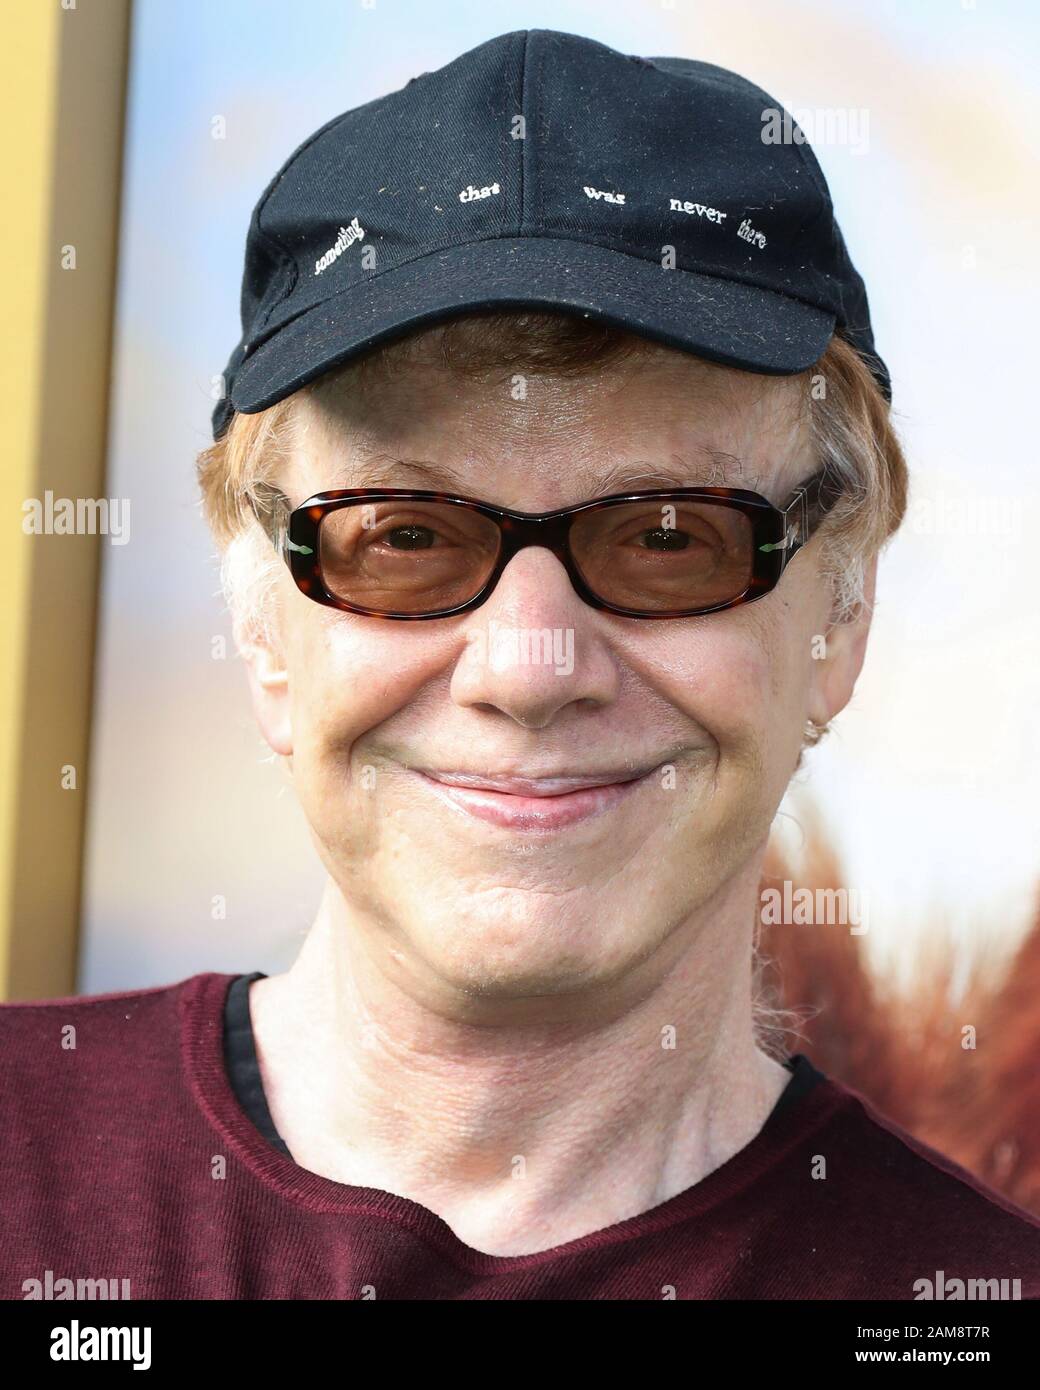 WESTWOOD, LOS ANGELES, CALIFORNIA, USA - JANUARY 11: Danny Elfman arrives at the Los Angeles Premiere Of Universal Pictures' 'Dolittle' held at the Regency Village Theatre on January 11, 2020 in Westwood, Los Angeles, California, United States. (Photo by Xavier Collin/Image Press Agency) Stock Photo